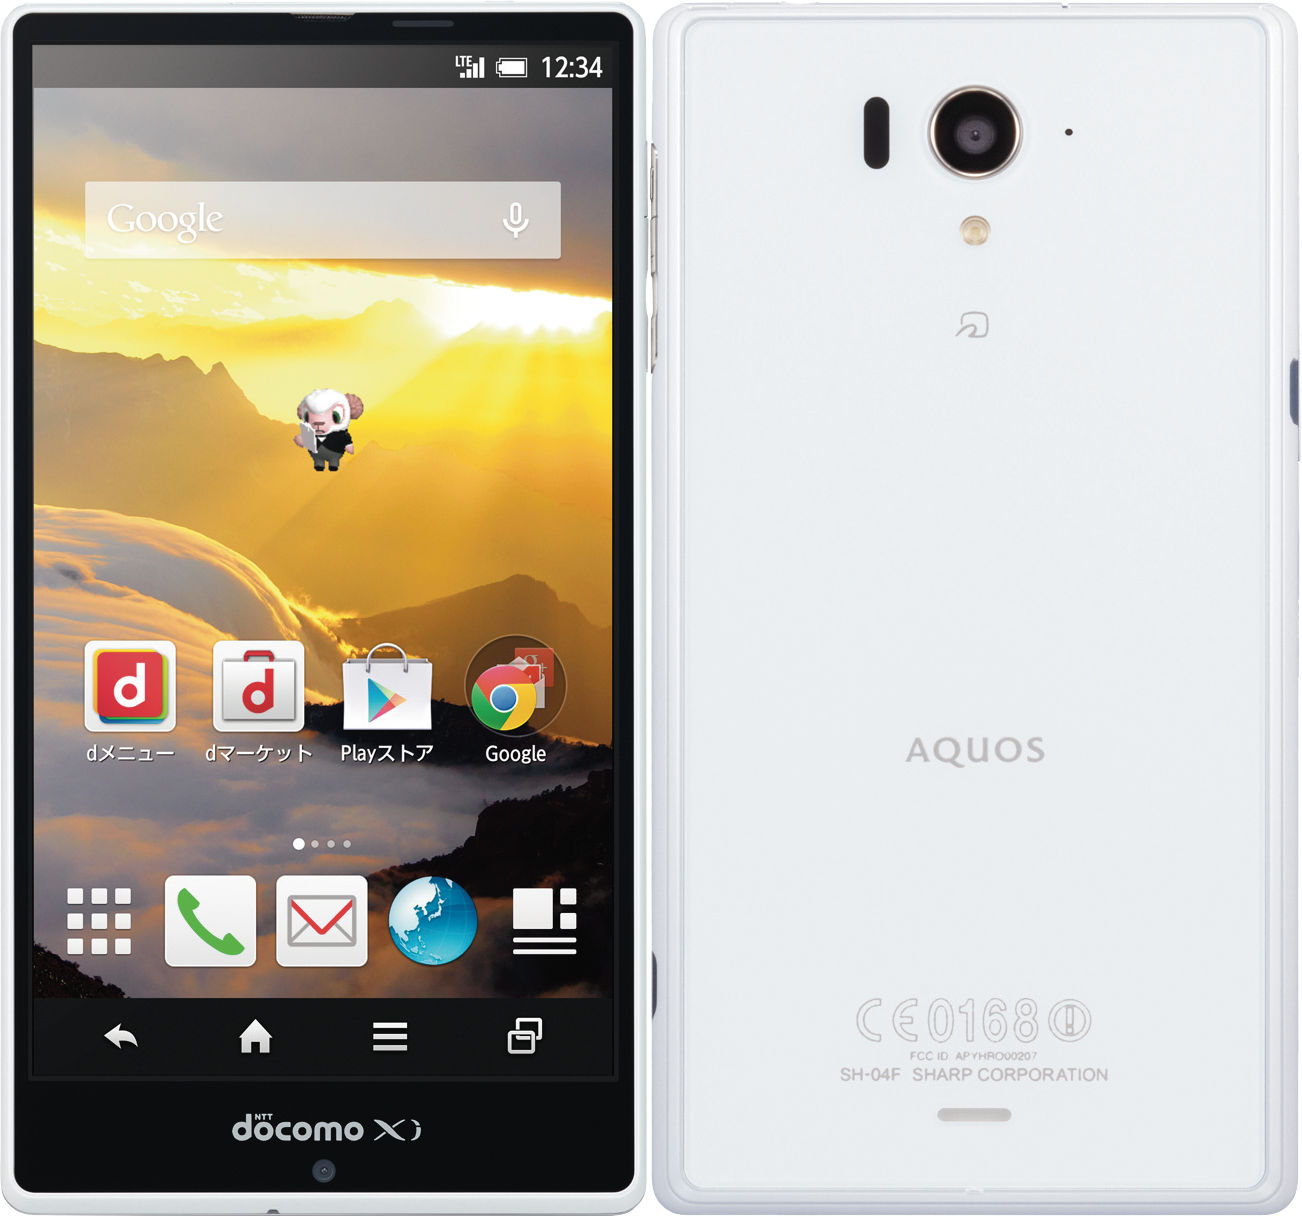 Ntt Docomo Announces A Device That Can Be Upgraded To Android 5 0 Planned To Be Upgraded In The Future Gigazine